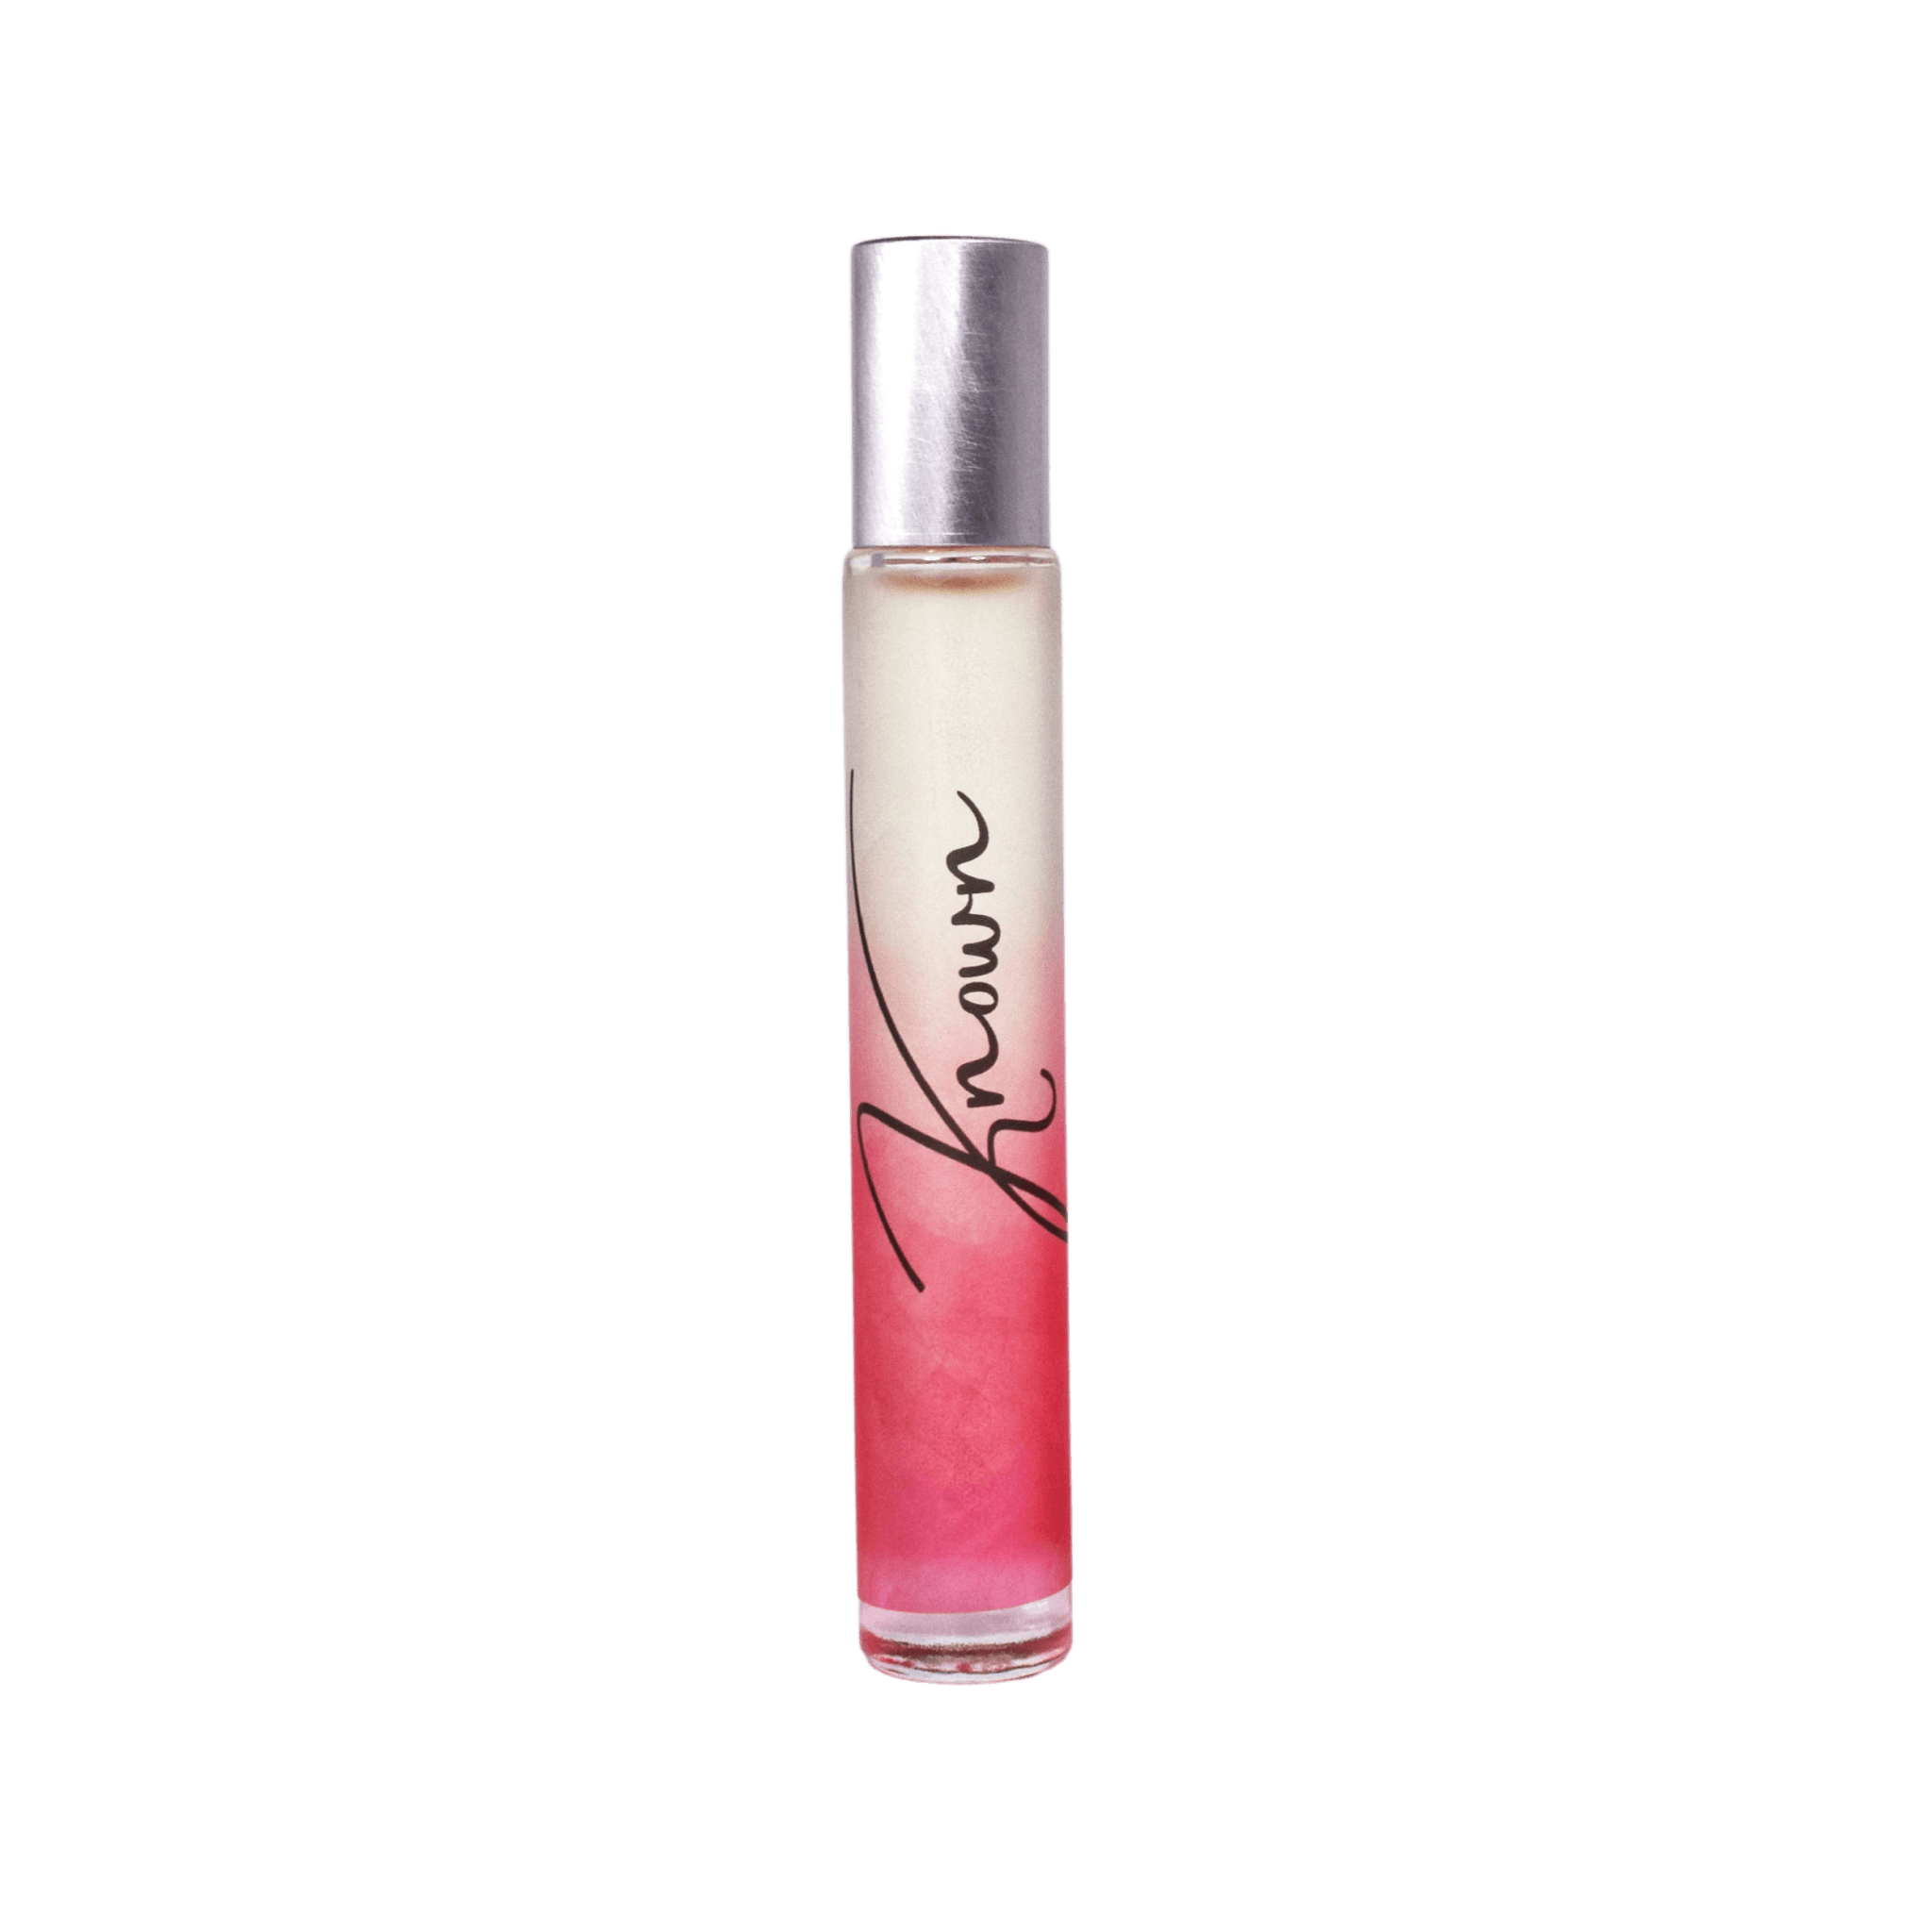 Known Rollerball Perfume by A Girl's Gotta Spa!